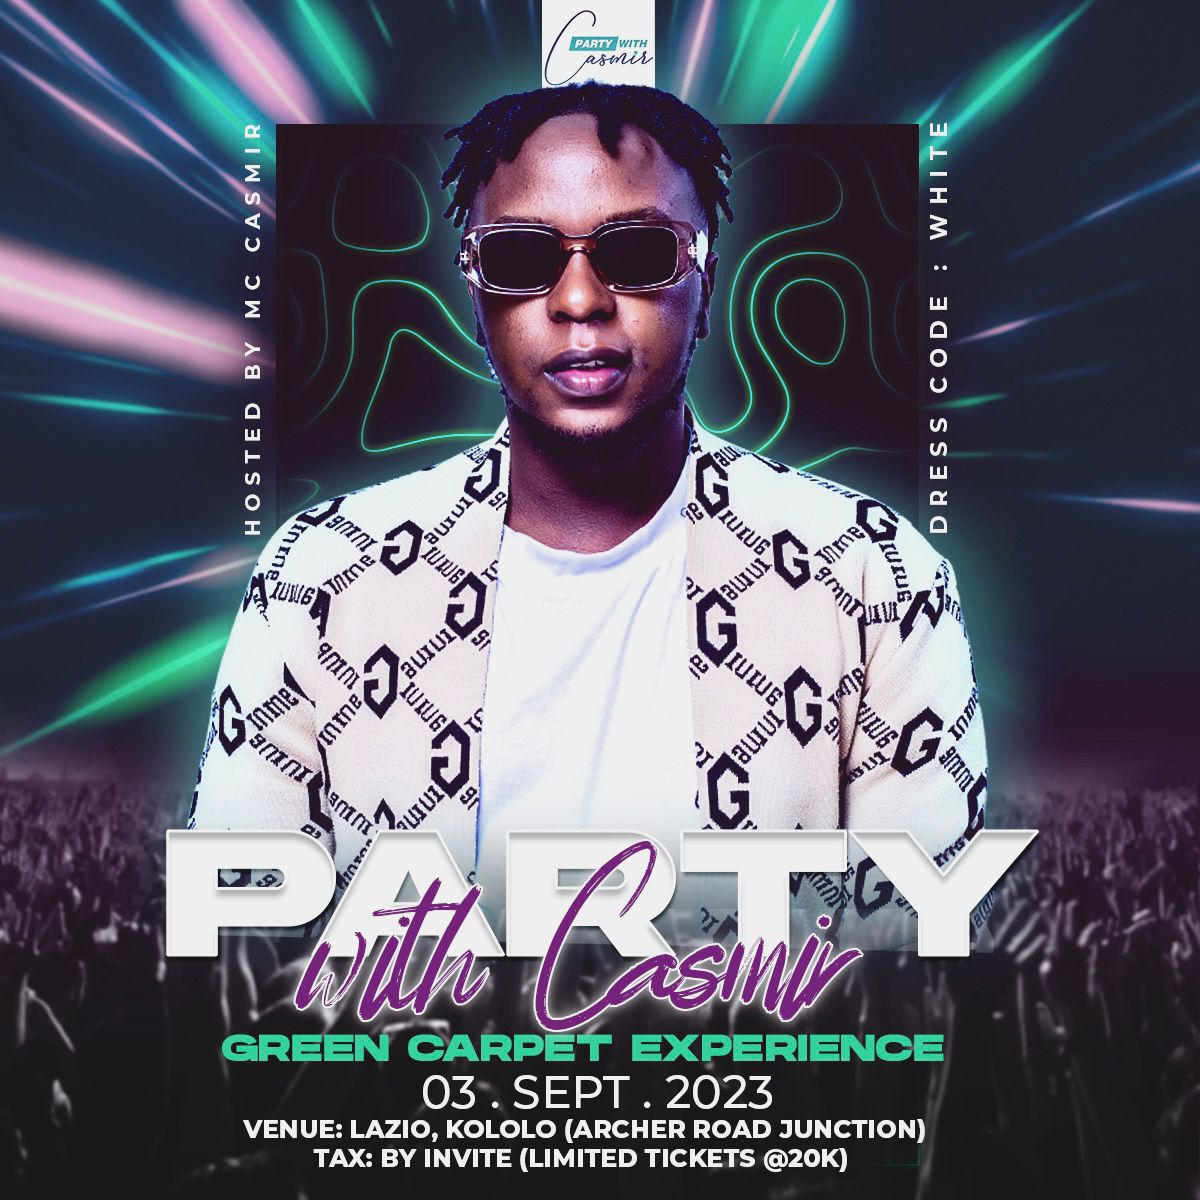 The day is getting closer 🤭🤭🔥🔥🔥🔥🔥get urself a ticket immediately coz 3rd September will ask for water 💦💦💦🔥🔥🔥🔥all is happening at Lazio 😊♥️
#greenpartyexperience 
#partywithcasmir